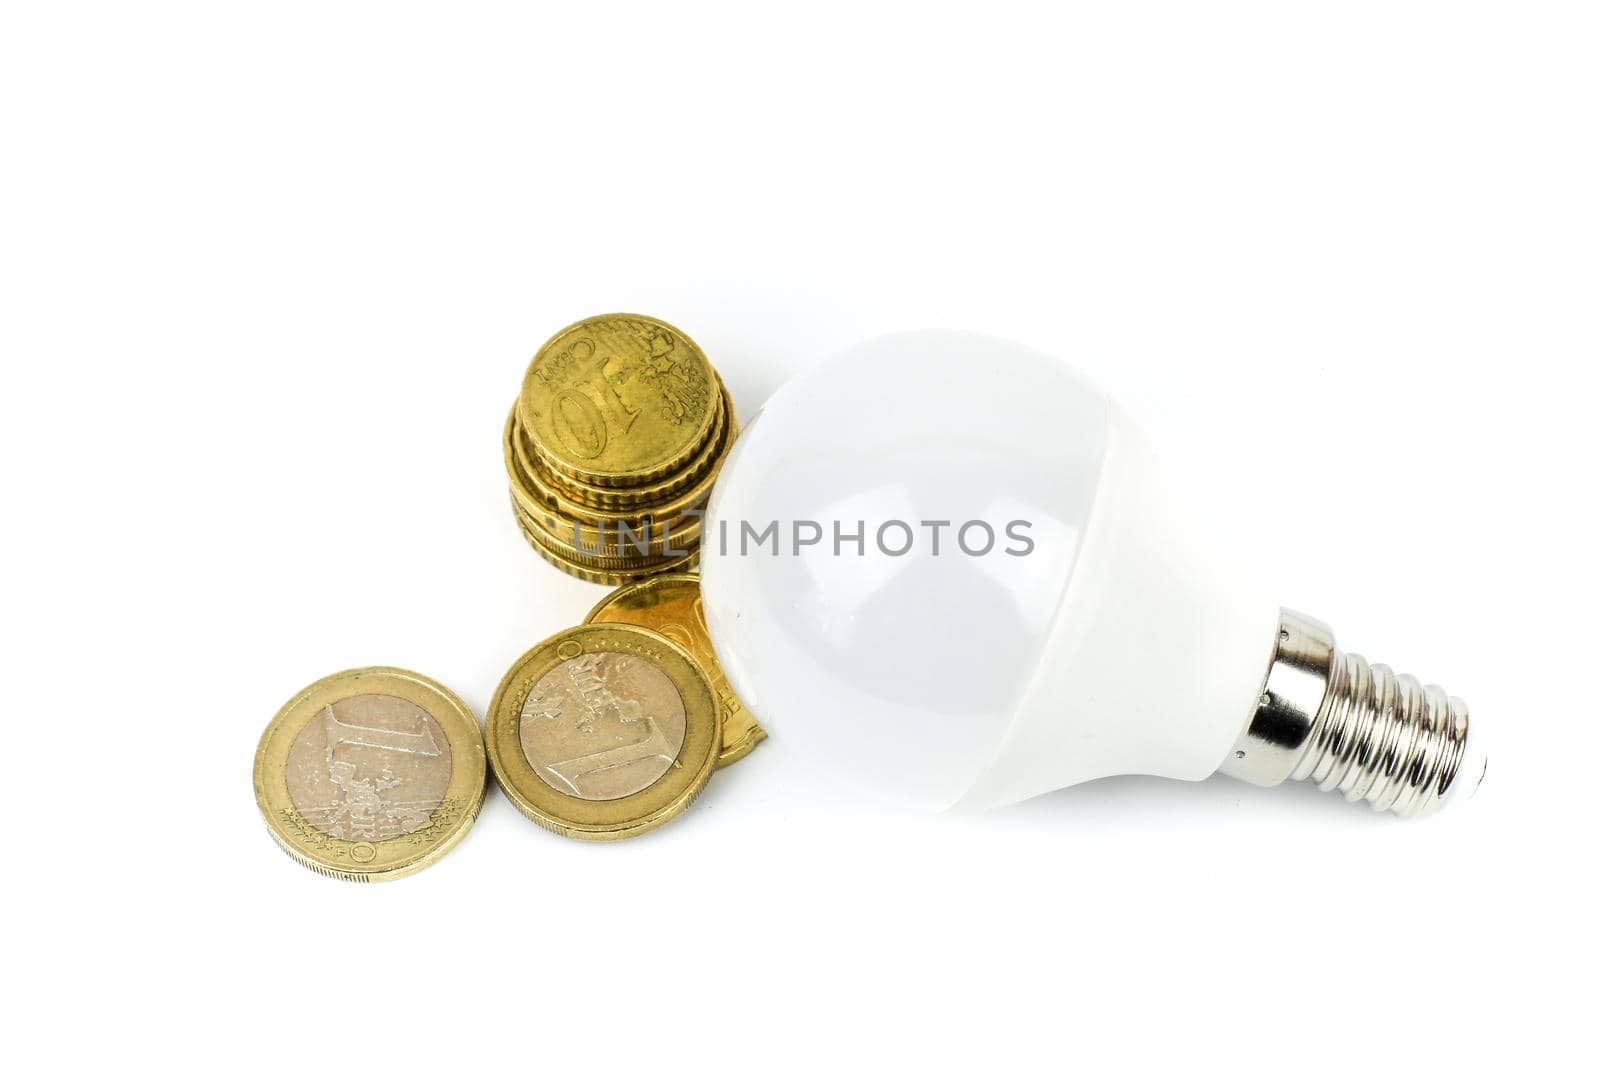 Led light bulb next to euro coins by soniabonet